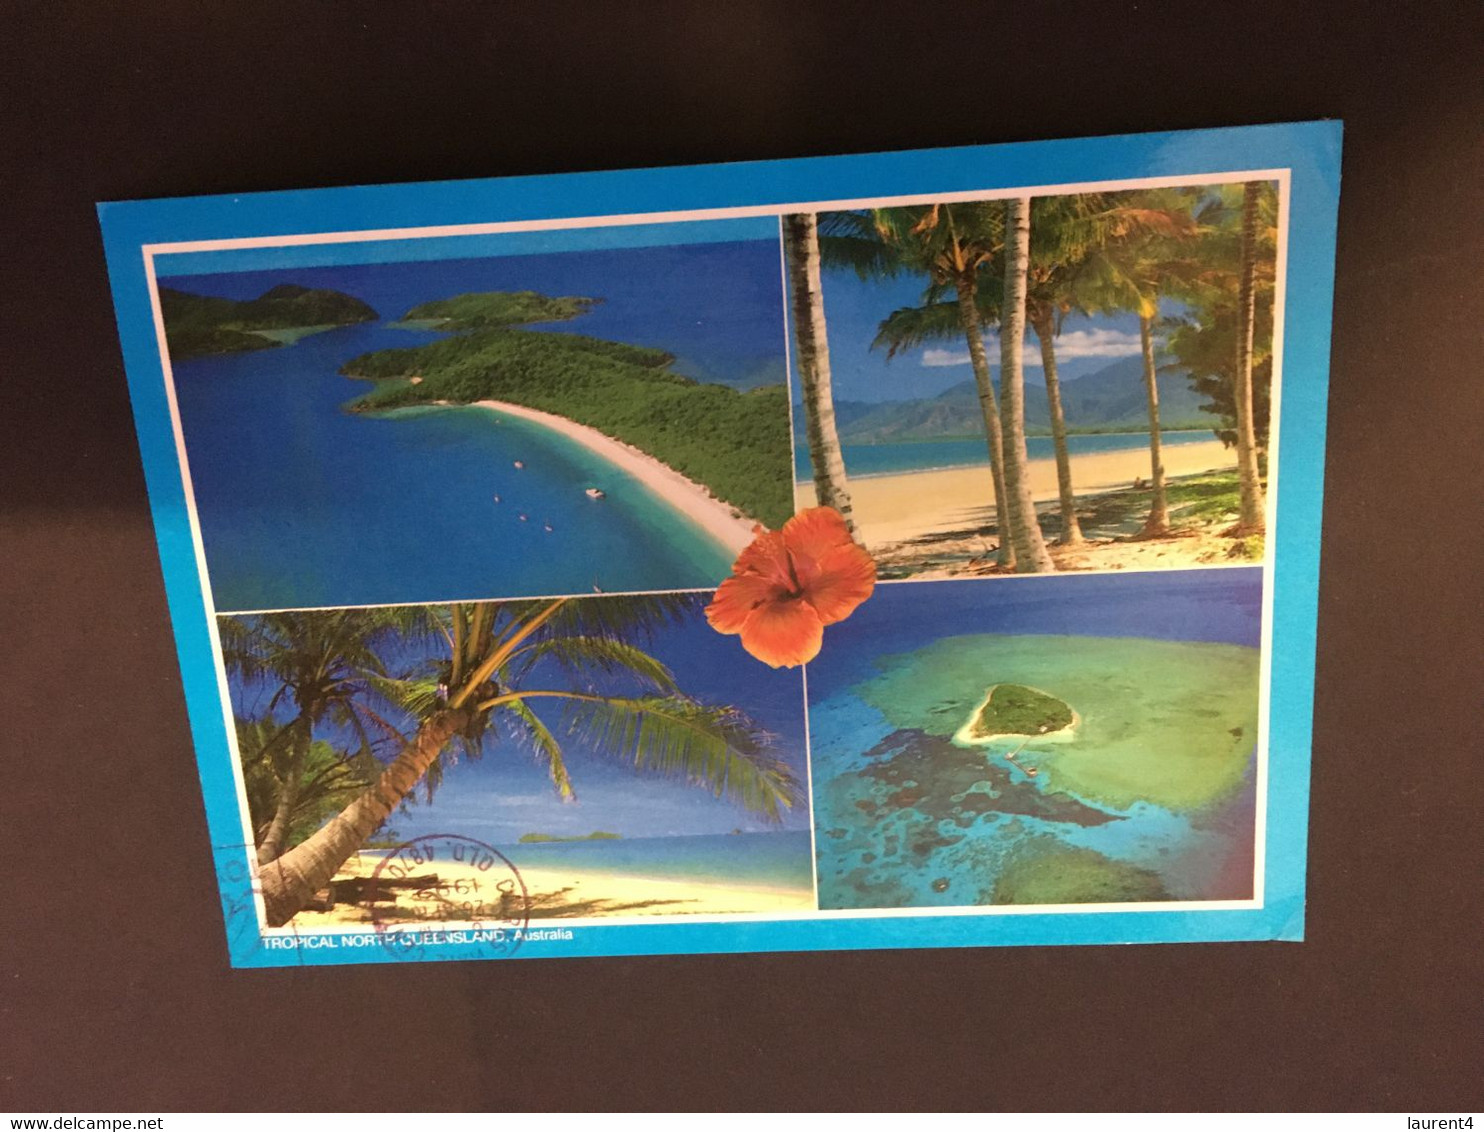 (EE 8) Australia -  (with Stamp) QLD - Tropical Rainforest & Islands - Great Barrier Reef